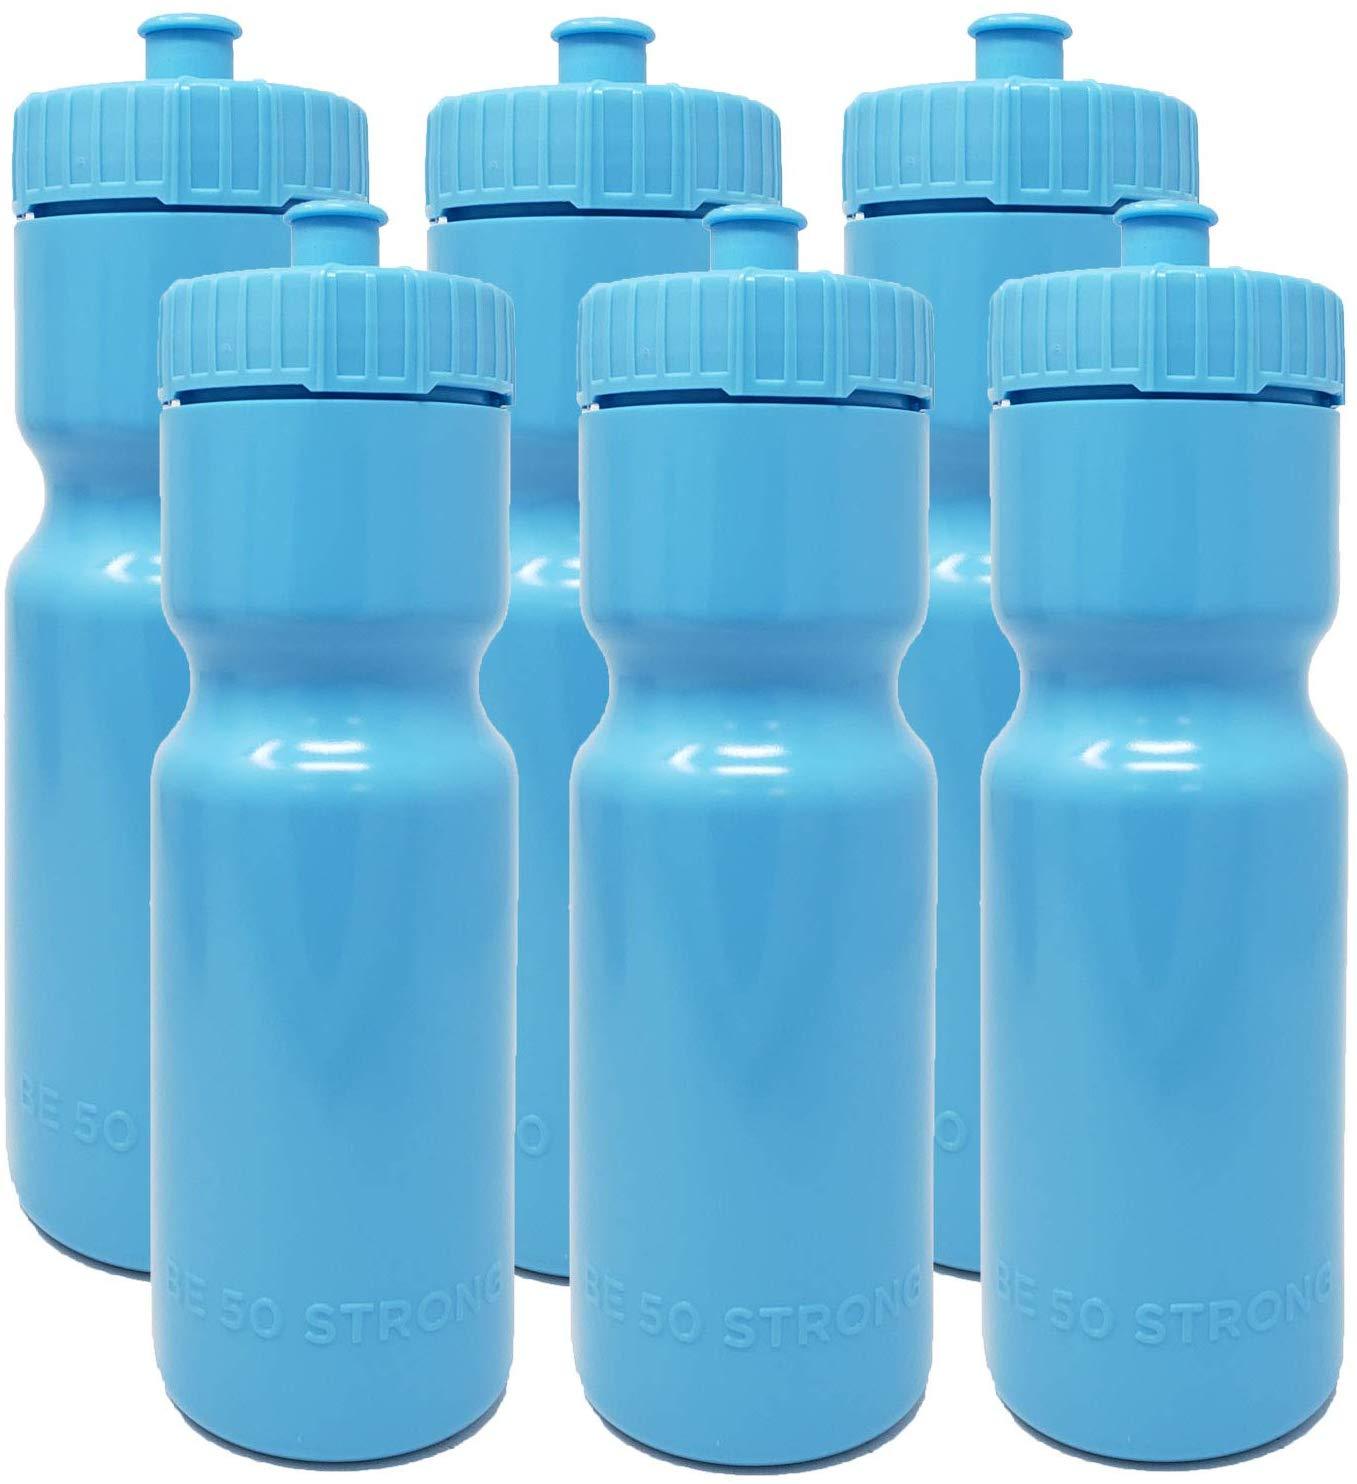 50 Strong Brand Sports Squeeze Water Bottles - Set of 6 - Team Pack – 22  oz. BPA Free Bottle Easy Open Push/Pull Cap – Multiple Colors Available  (Black) 